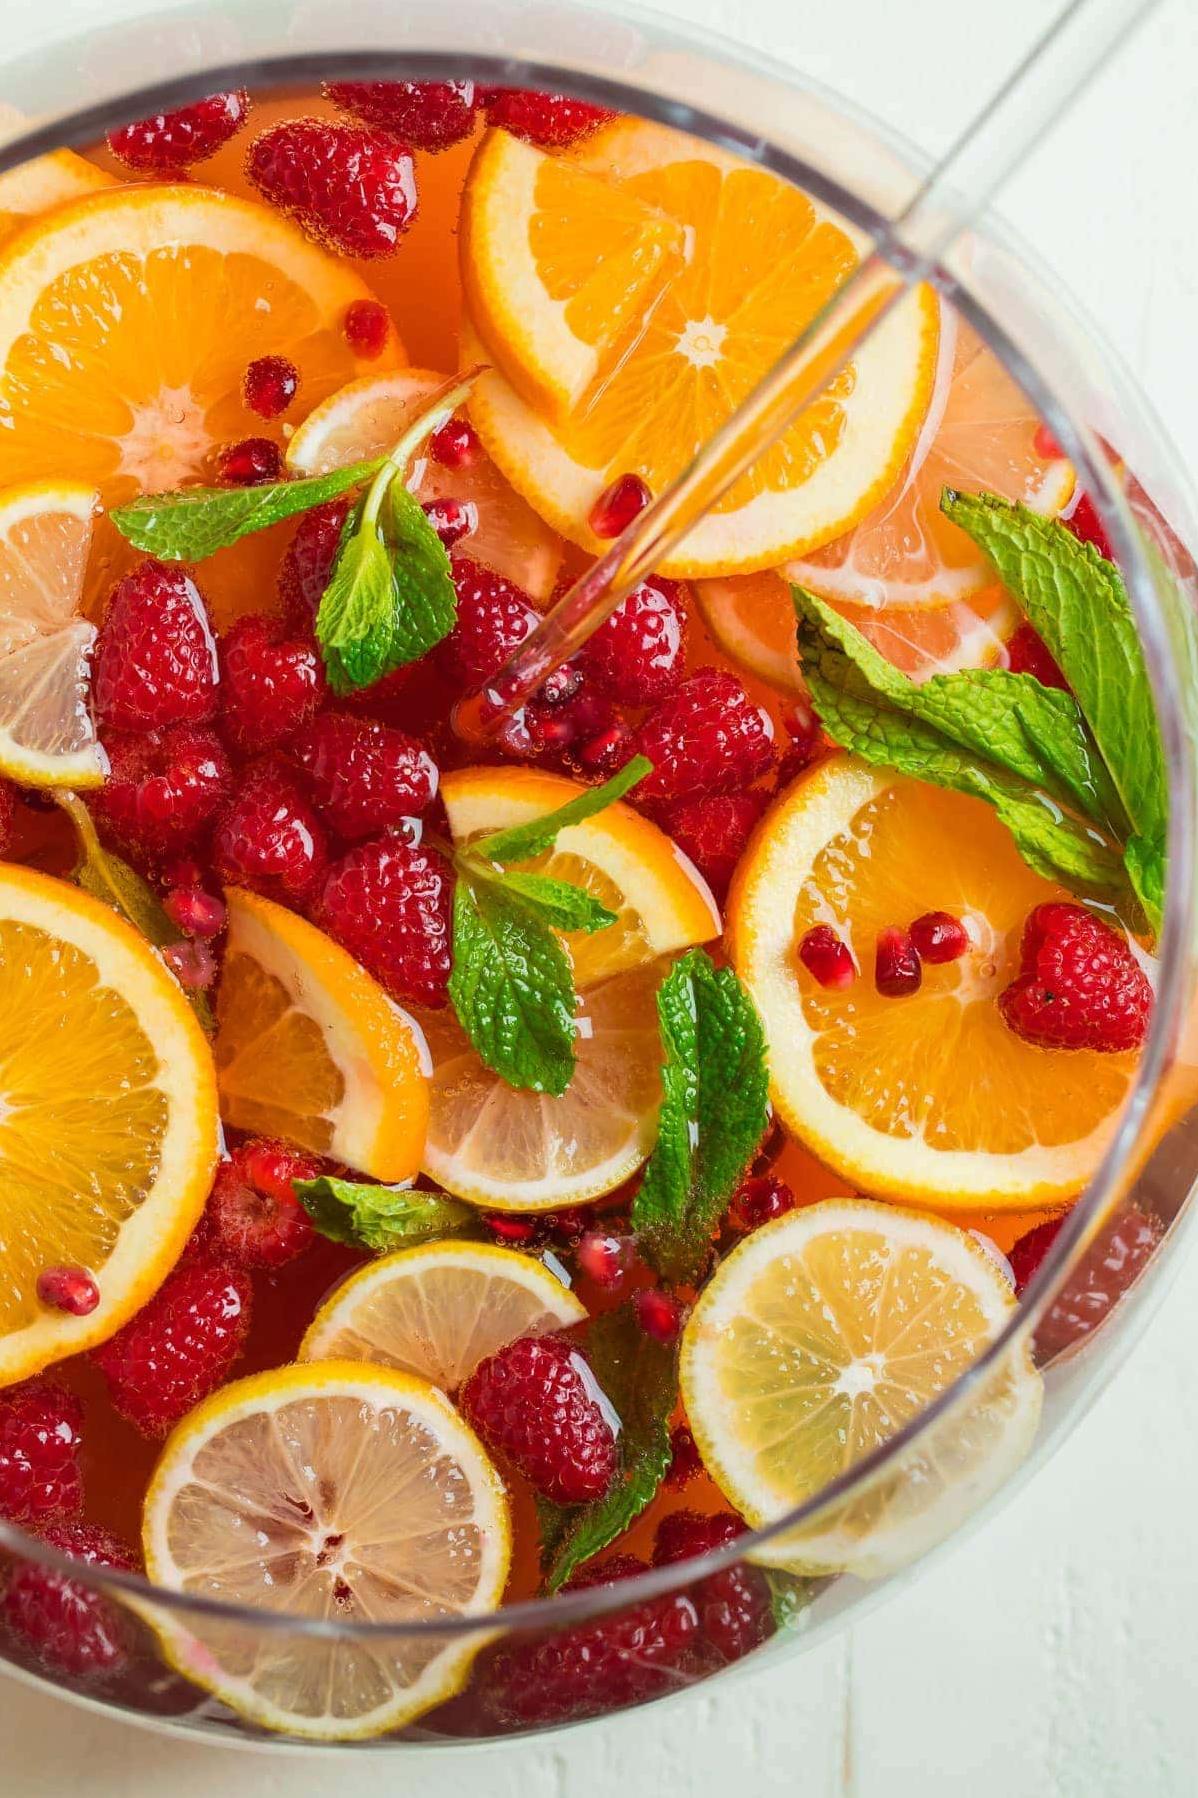 Champagne Fruit Punch